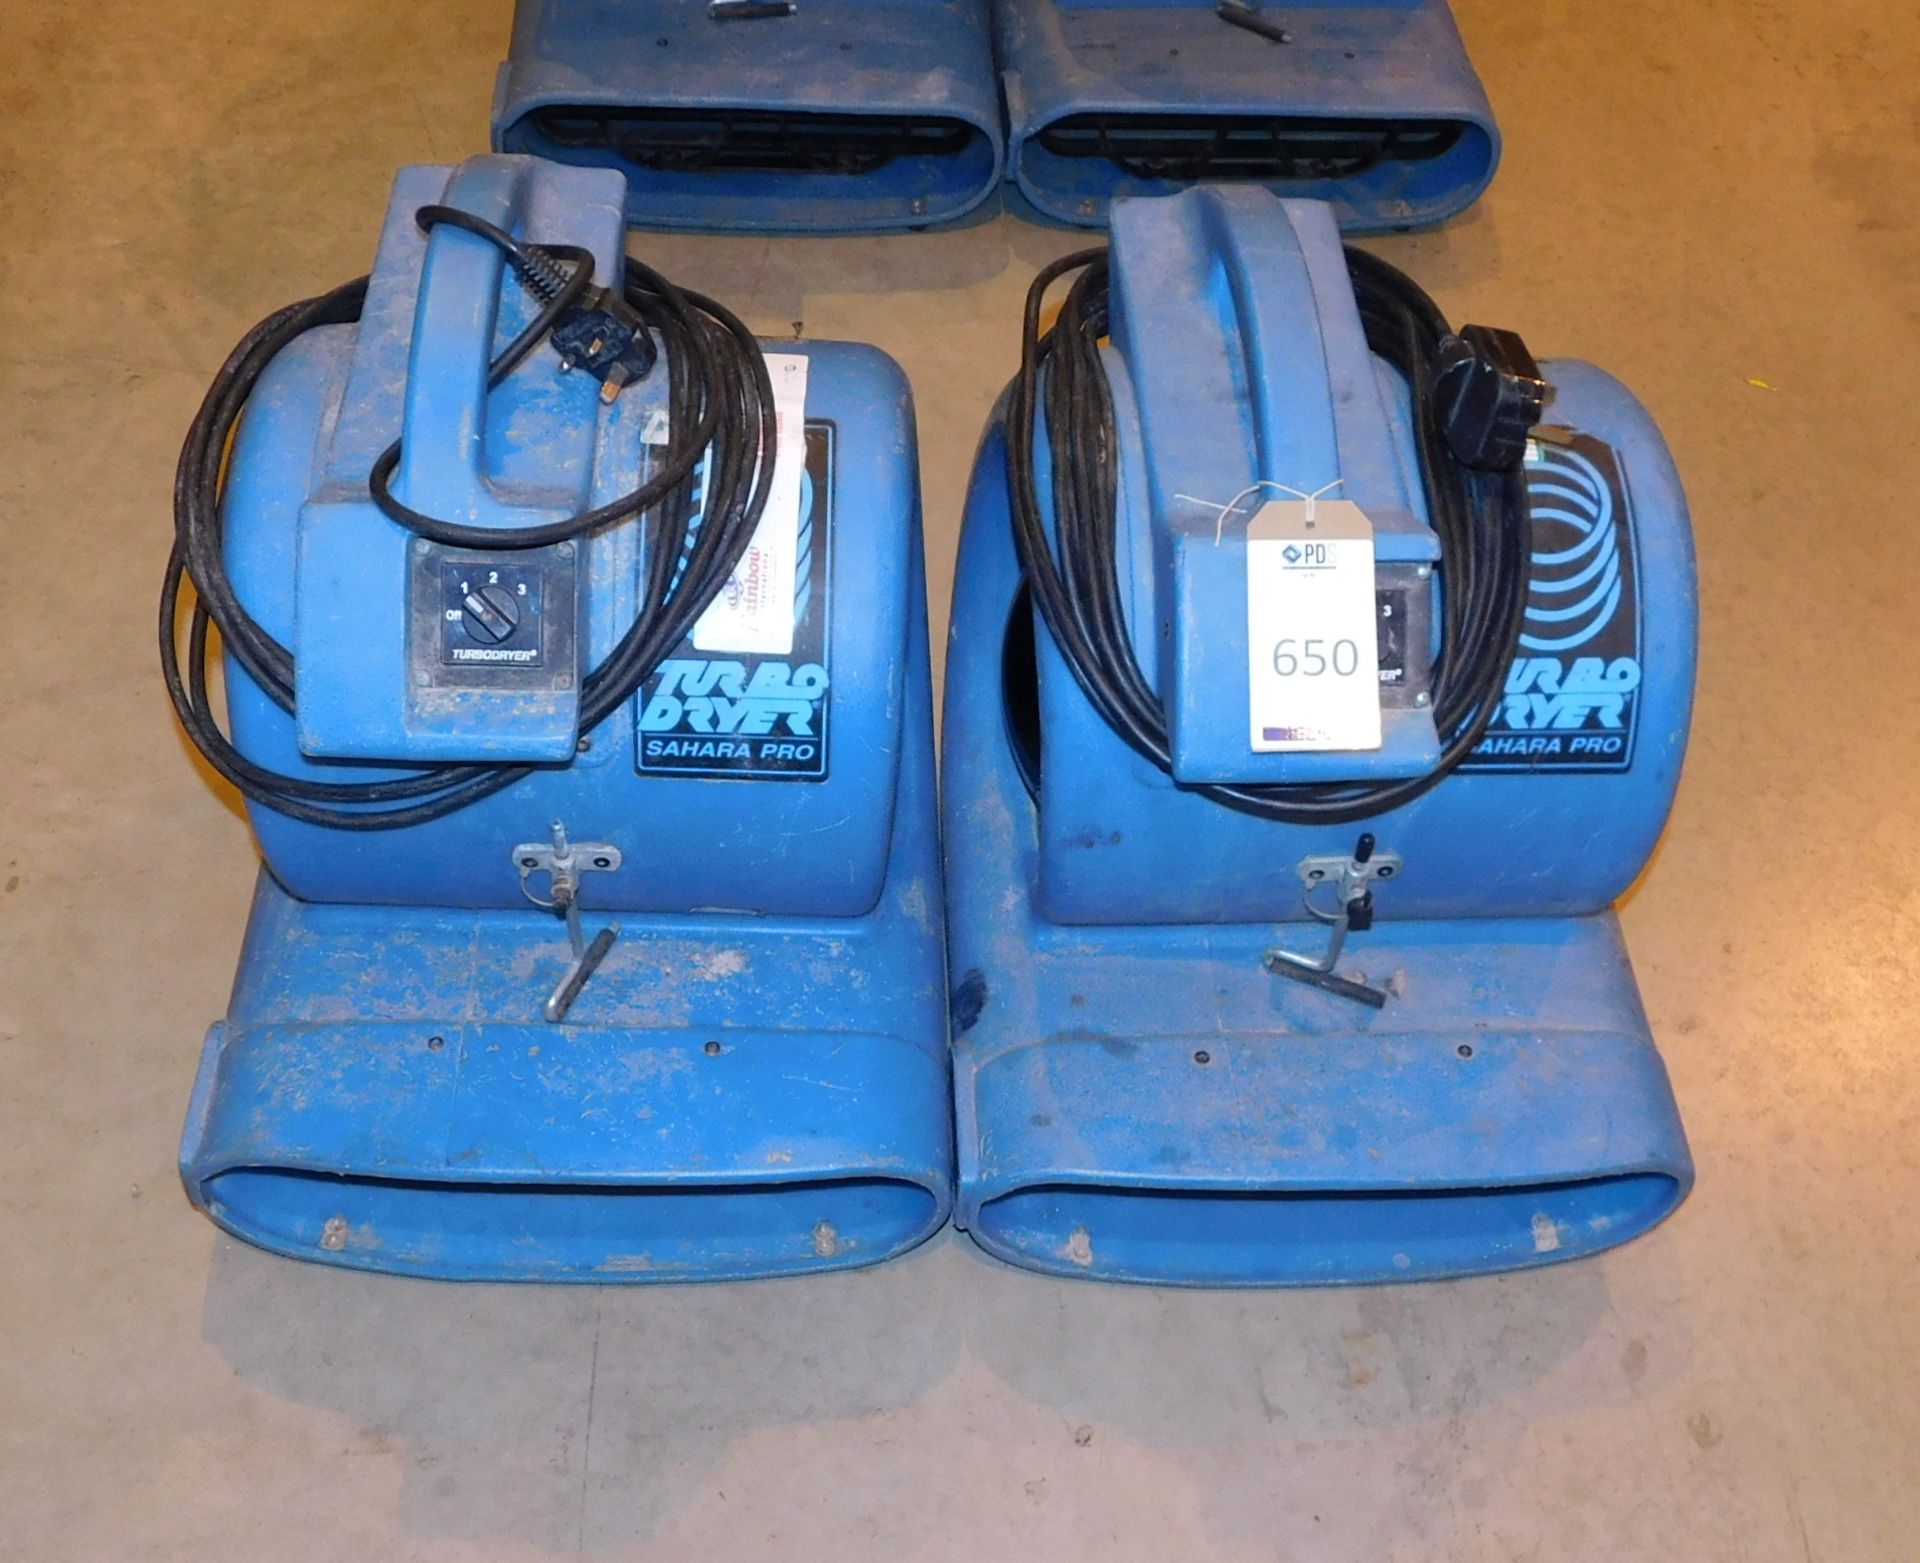 2 Drieaz Sahara Pro Turbodryer Air Movers (Located Milton Keynes – See General Notes for Viewing &